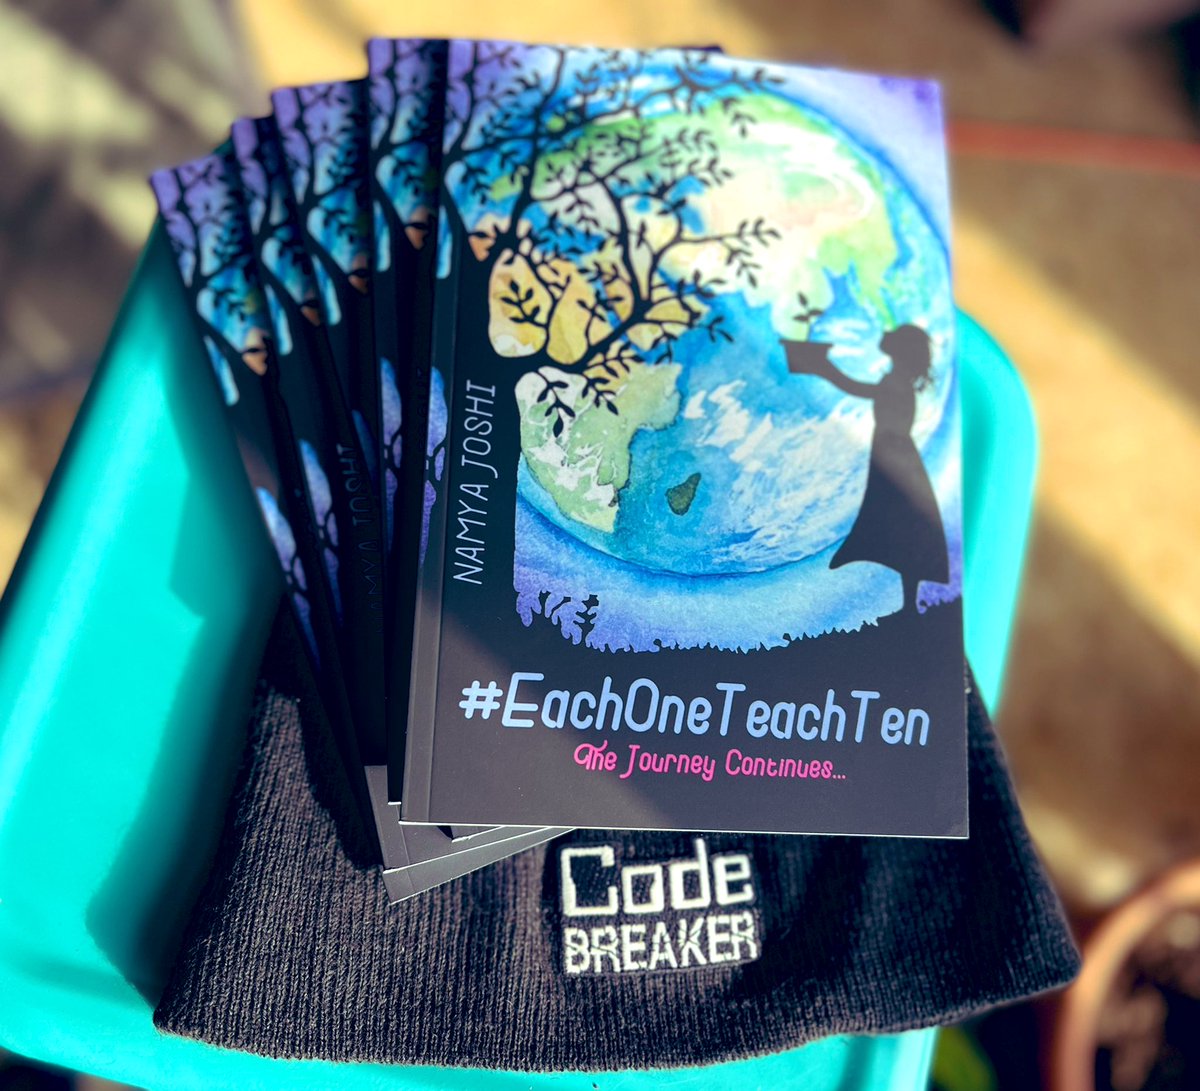 Hot off the press!! 📚 

We have 5 copies of #EachOneTeachTen by @WonderNamya to give away!

Simply follow us and retweet to enter! Bonus points for tagging friends!

#CodeBreaker 🦾

Check it out here: 

amazon.com/EachOneTeachTe…